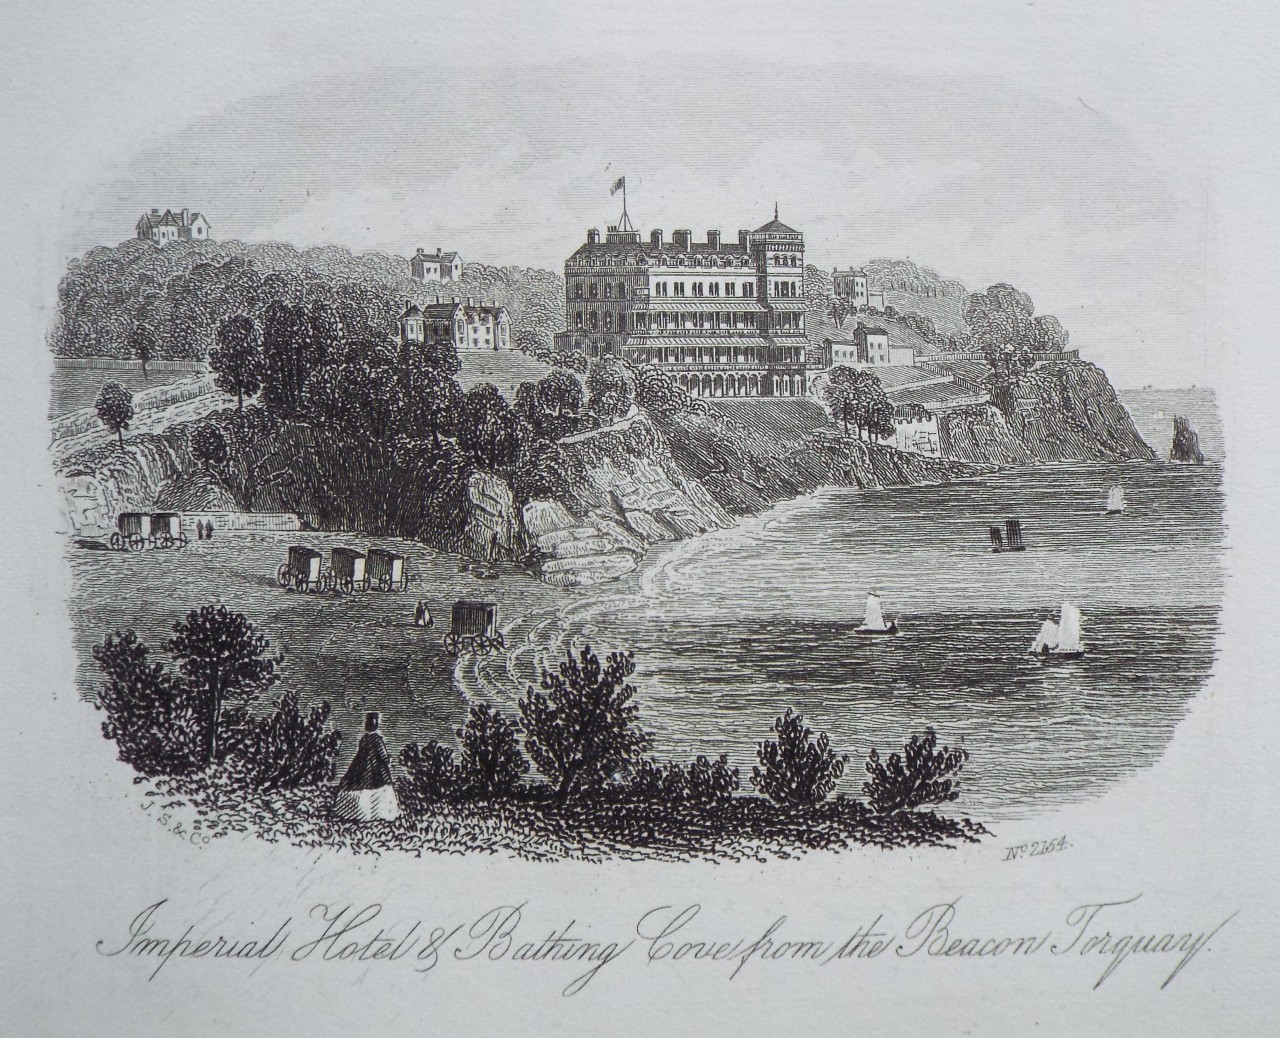 Steel Vignette - Imperial Hotel & Bathing Cove, from the Beacon, Torquay. - J